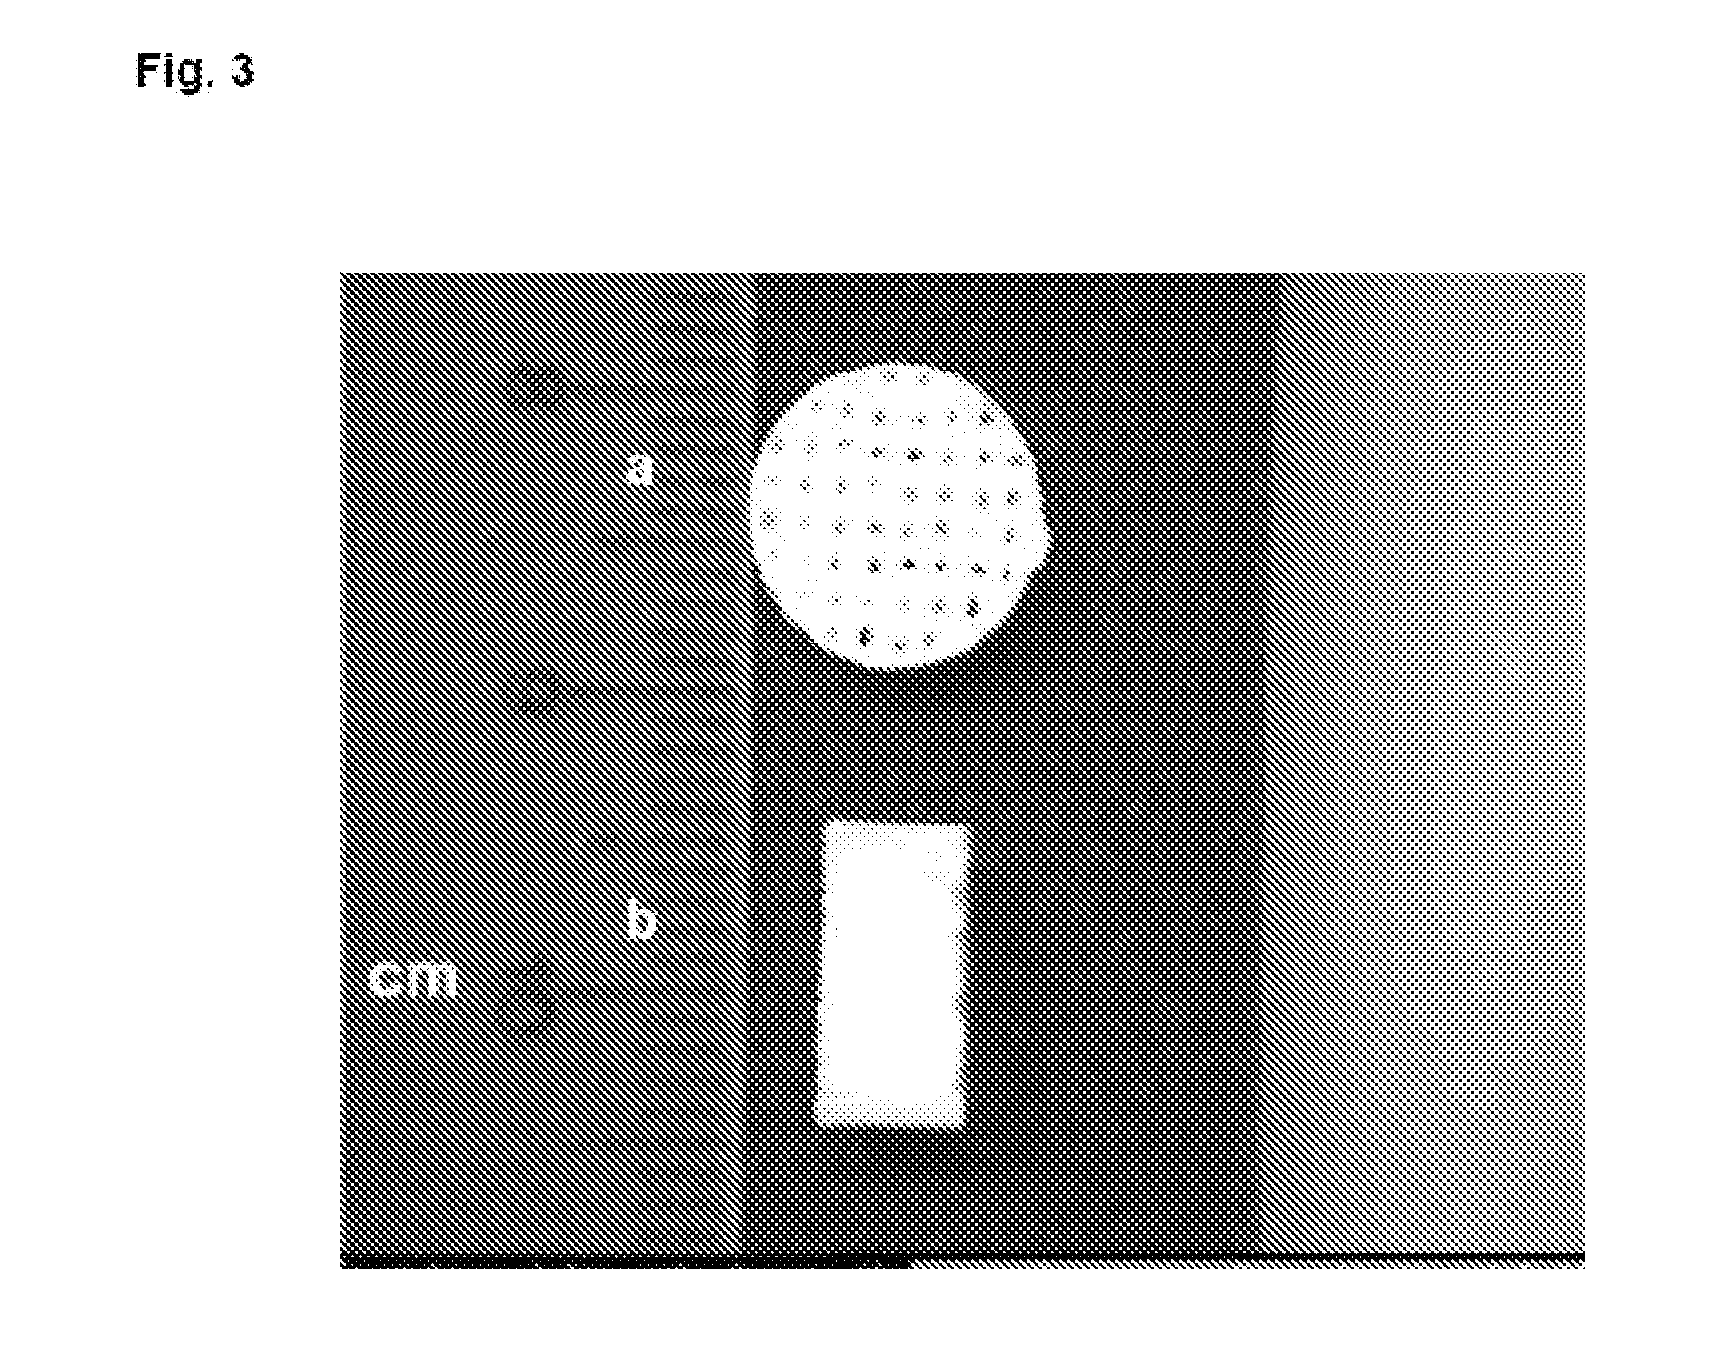 Three-dimensional matrices of structured porous monetite for tissue engineering and bone regeneration, and method of the preparation thereof